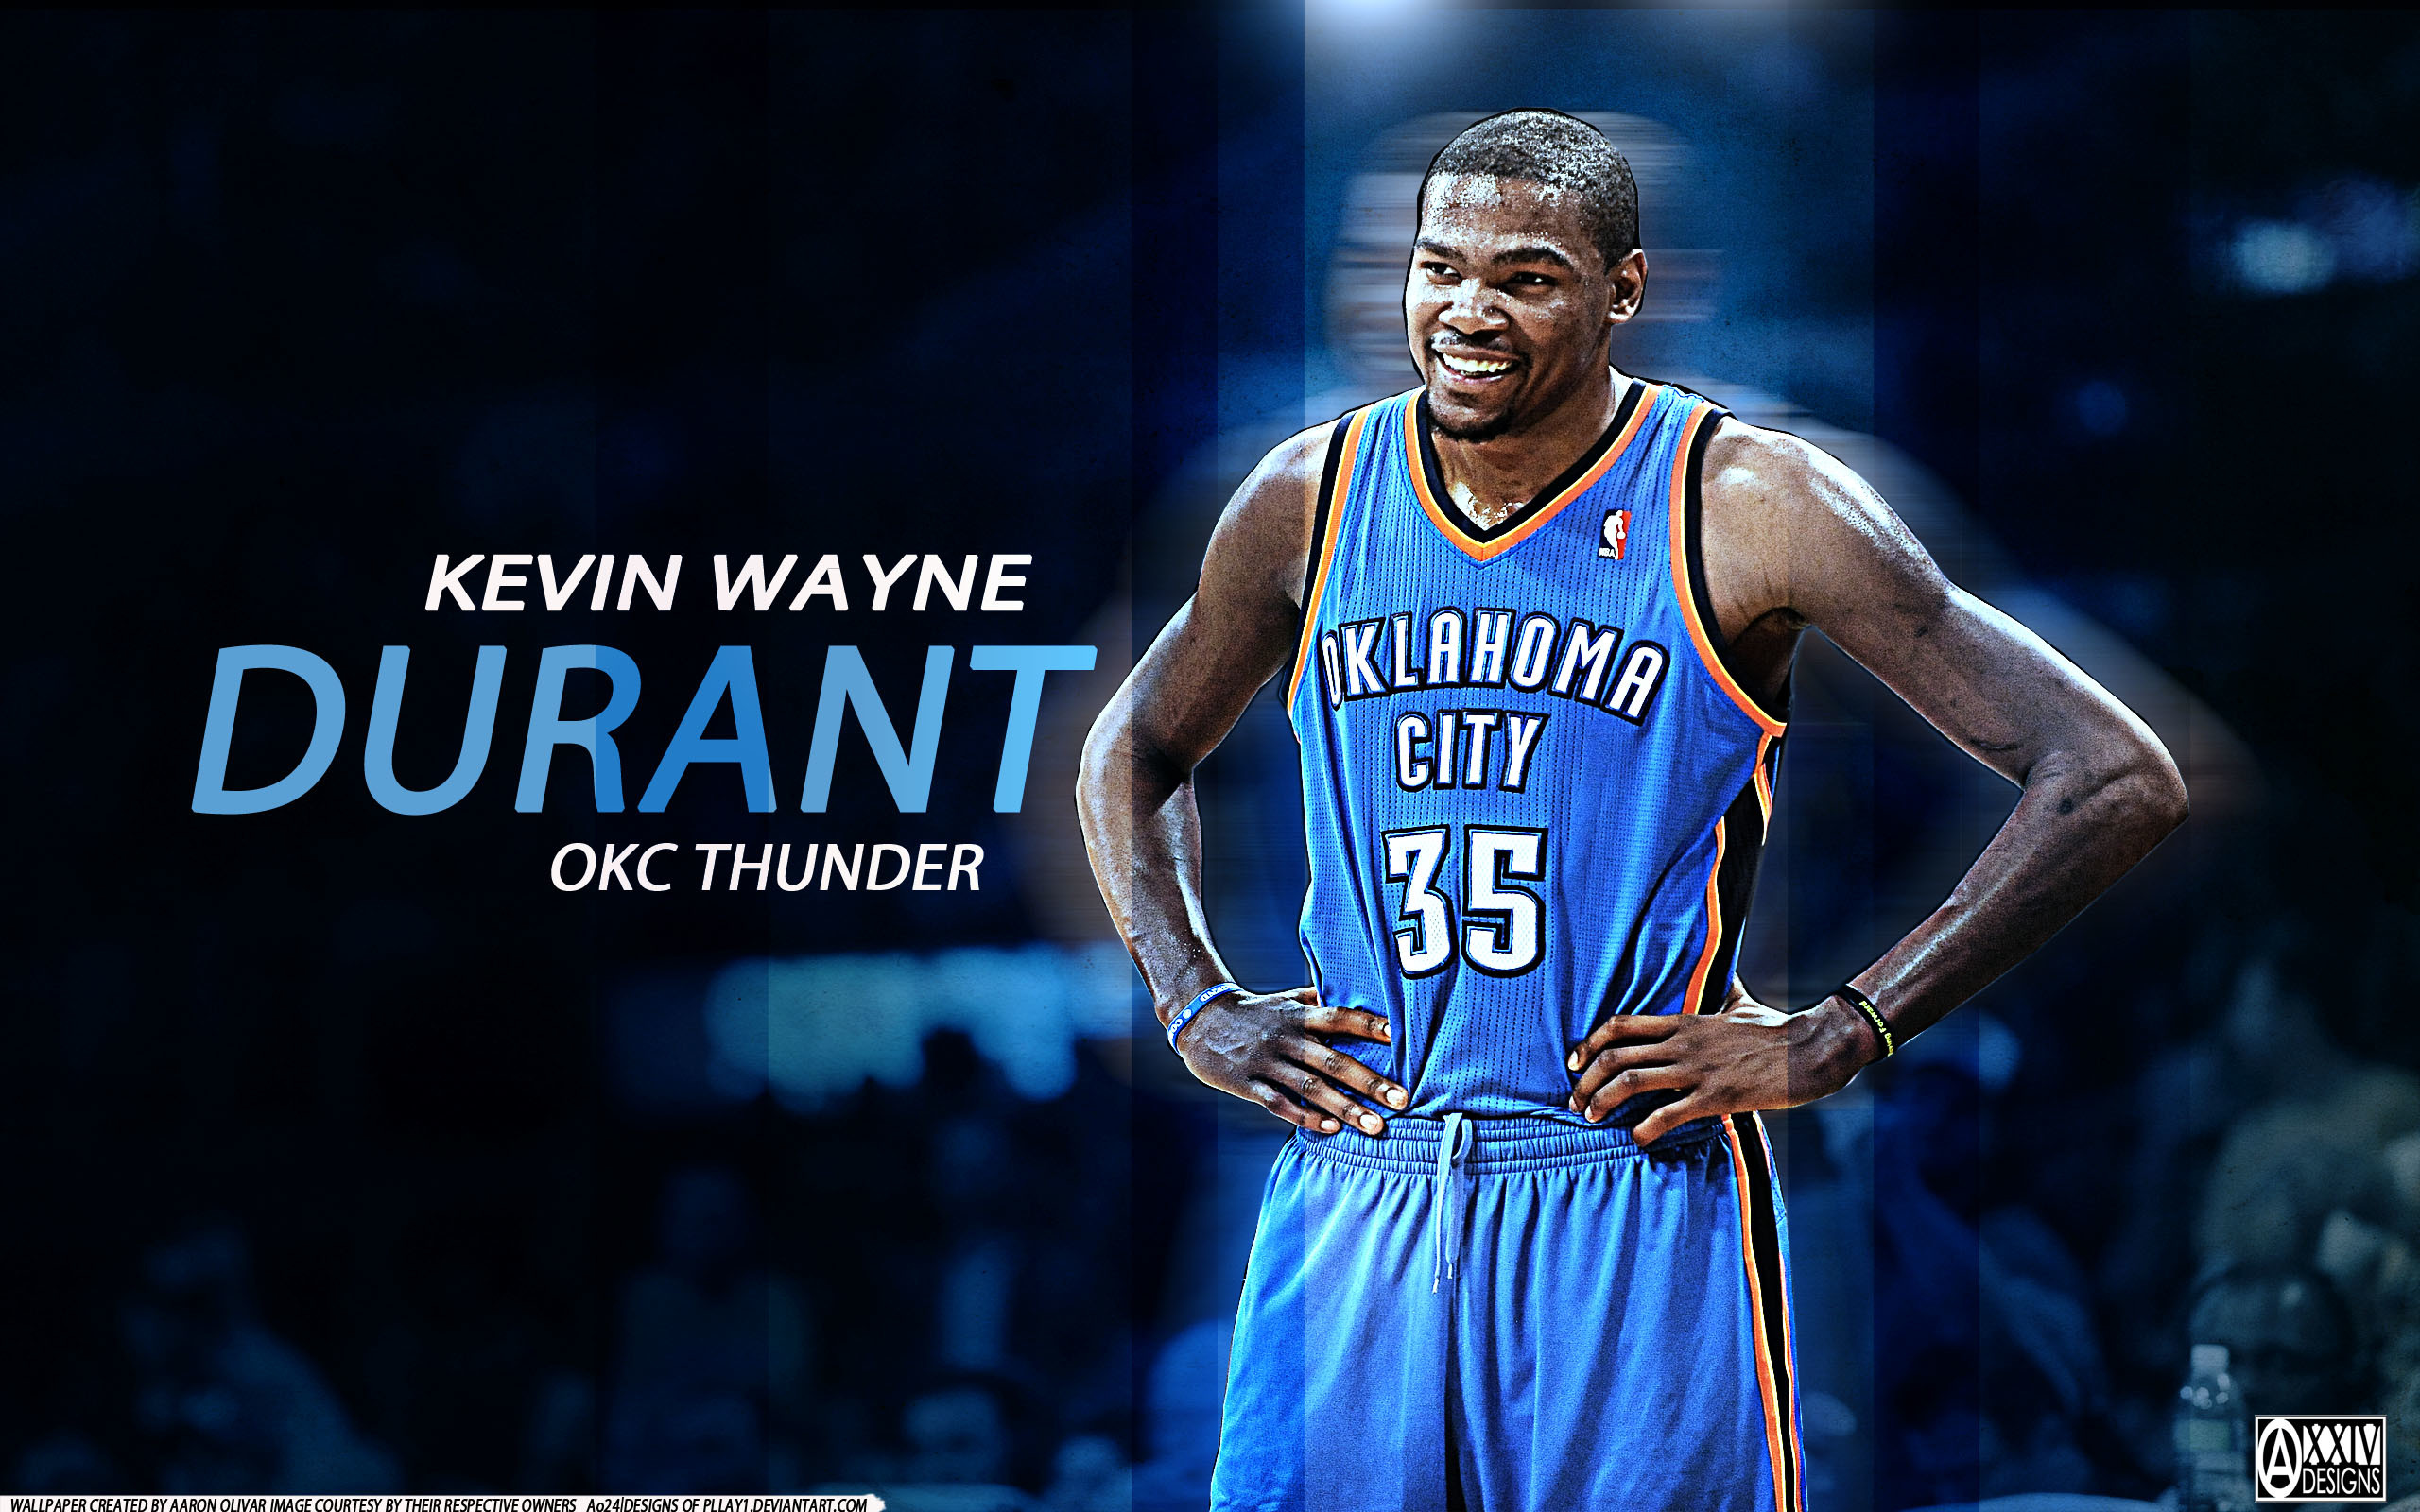 Kevin Durant Russell Westbrook Wallpaper HD Wallpapers Pinterest Kevin durant, Wallpaper and Wallpaper backgrounds